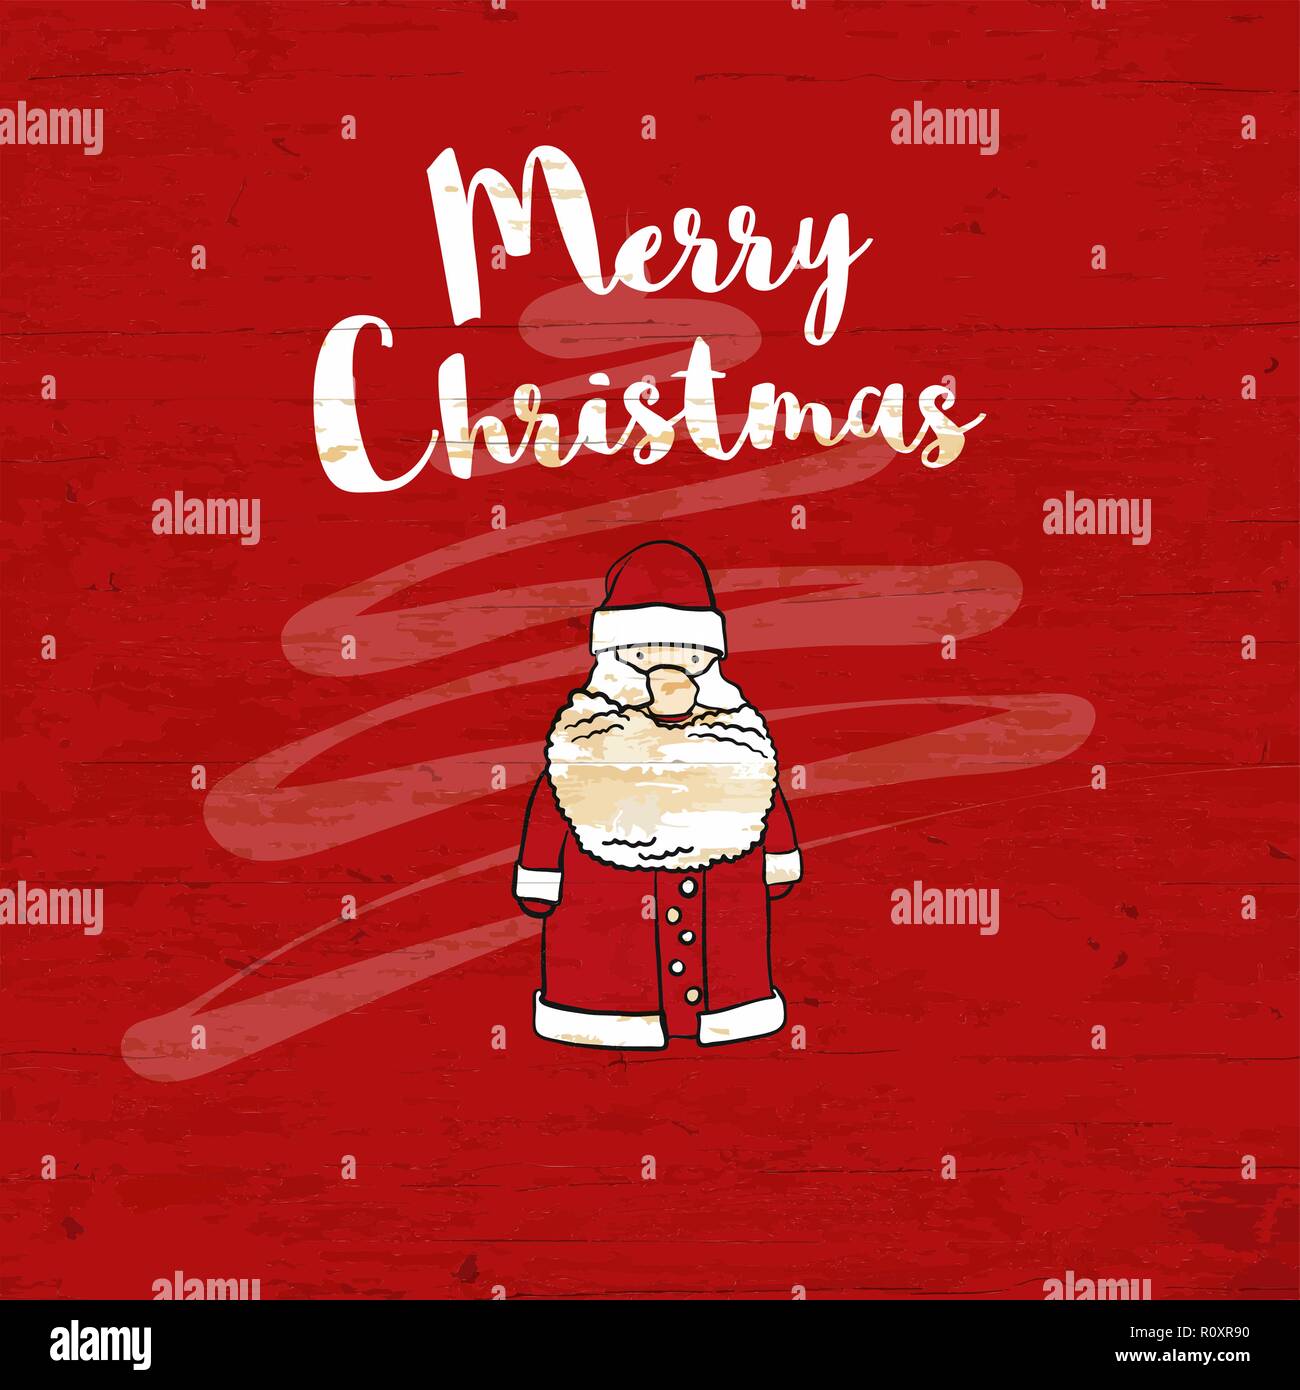 Merry christmas lettering on wooden background. Vector illustration drawn by hand. Stock Vector